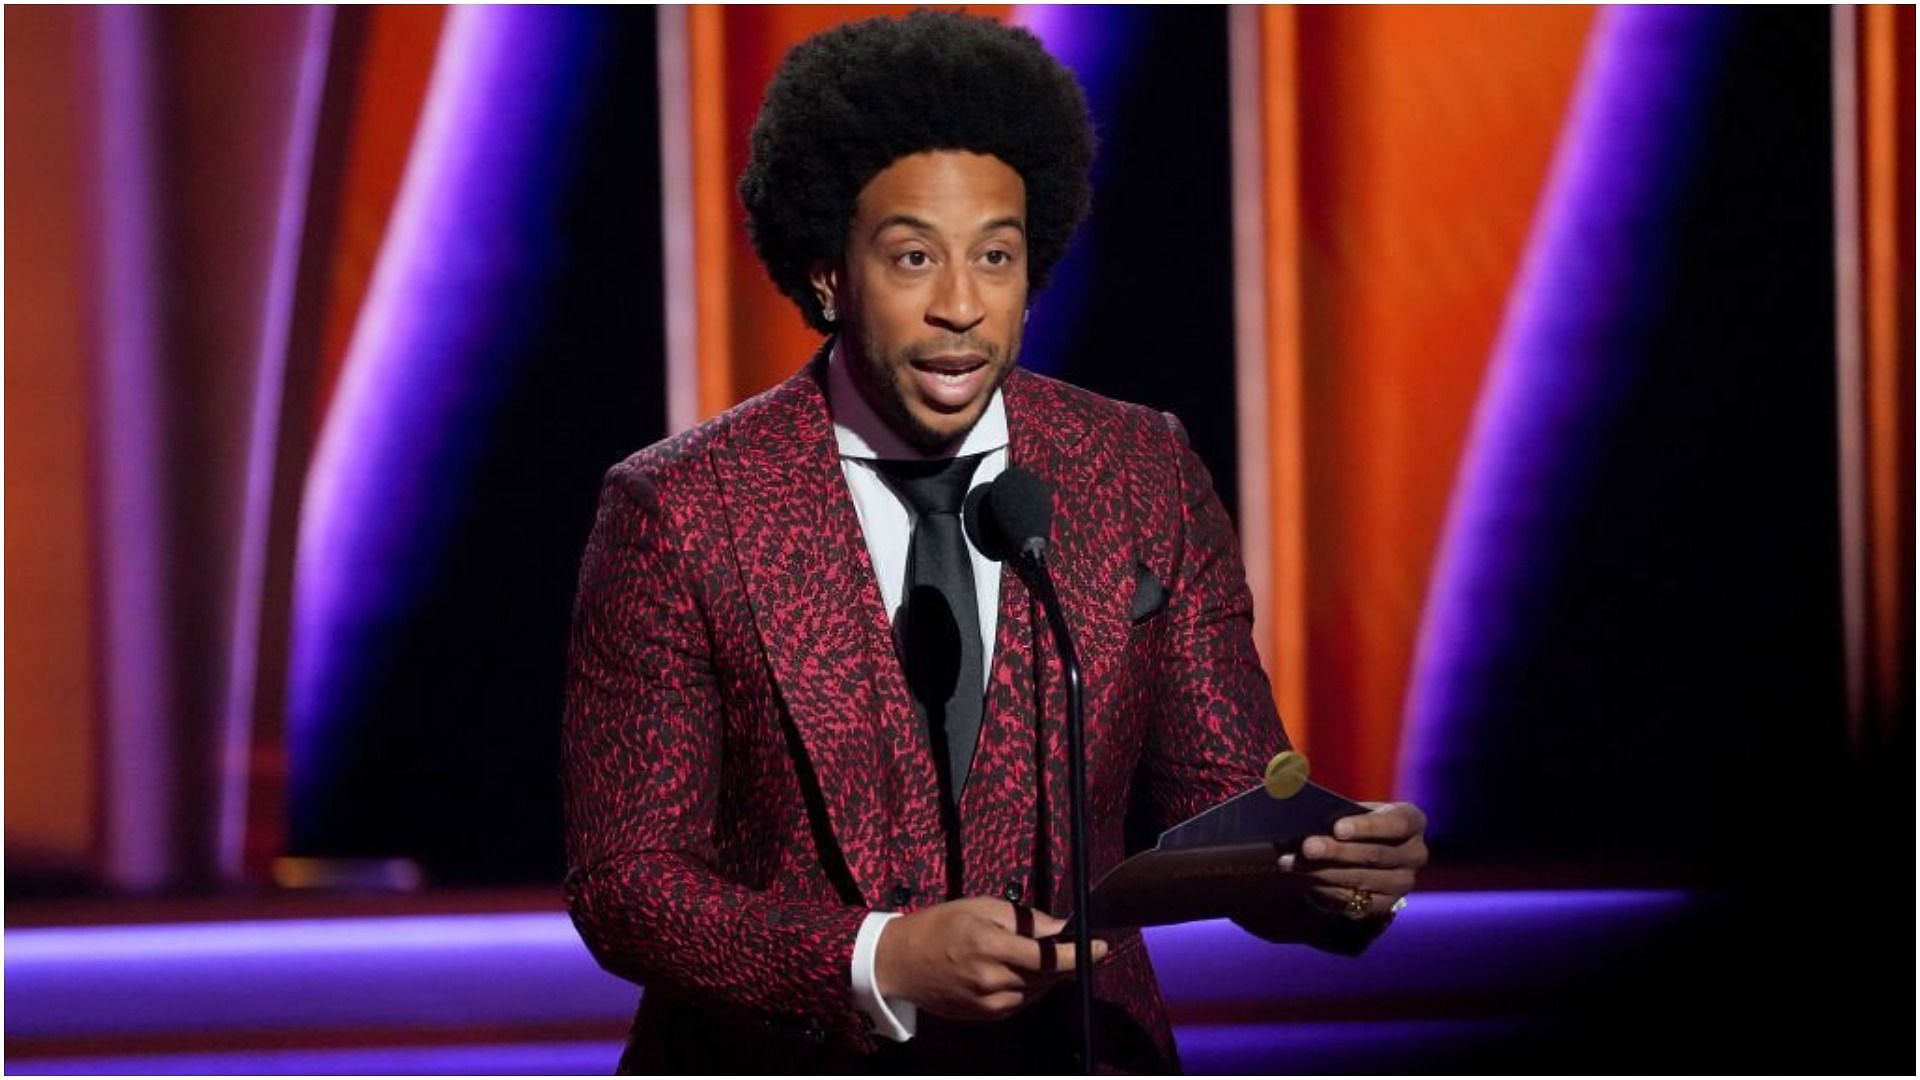 Ludacris graduated from Banneker High School in 1995 (Image via Kevin Mazur/Getty Images)